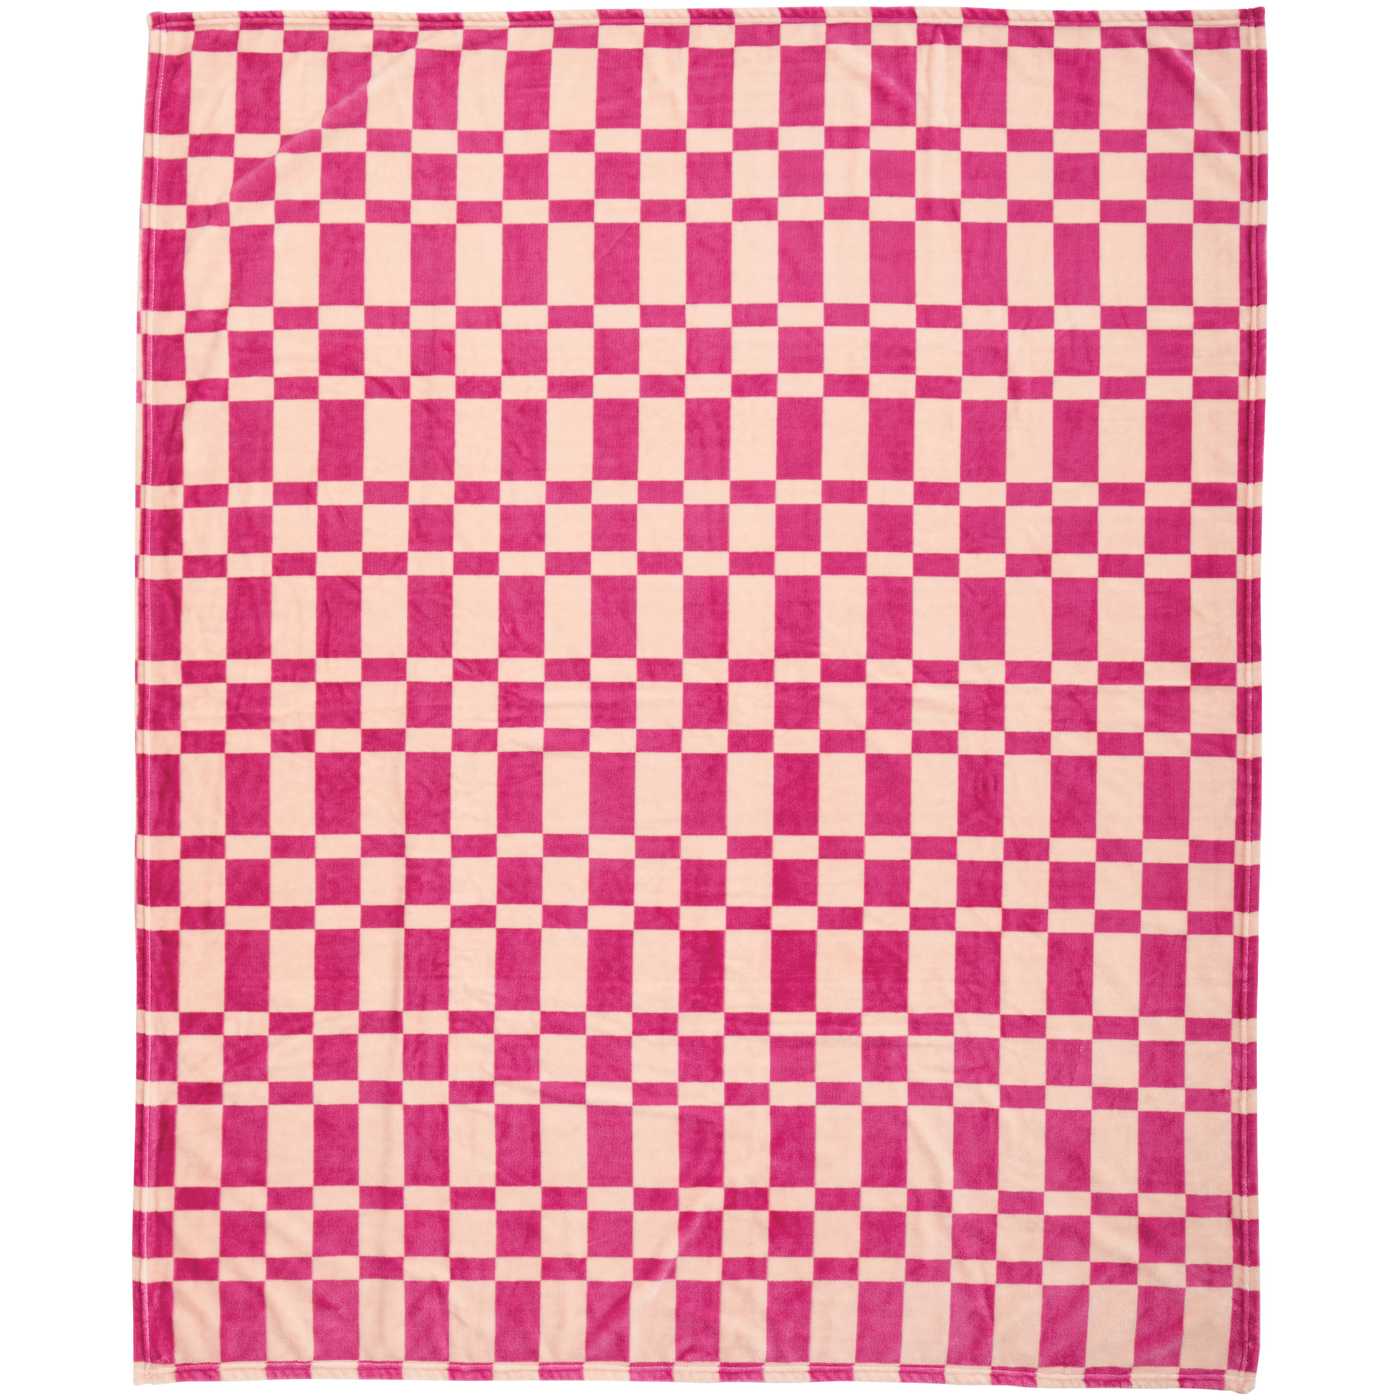 Destination Holiday Throw Blanket - Pink; image 3 of 3